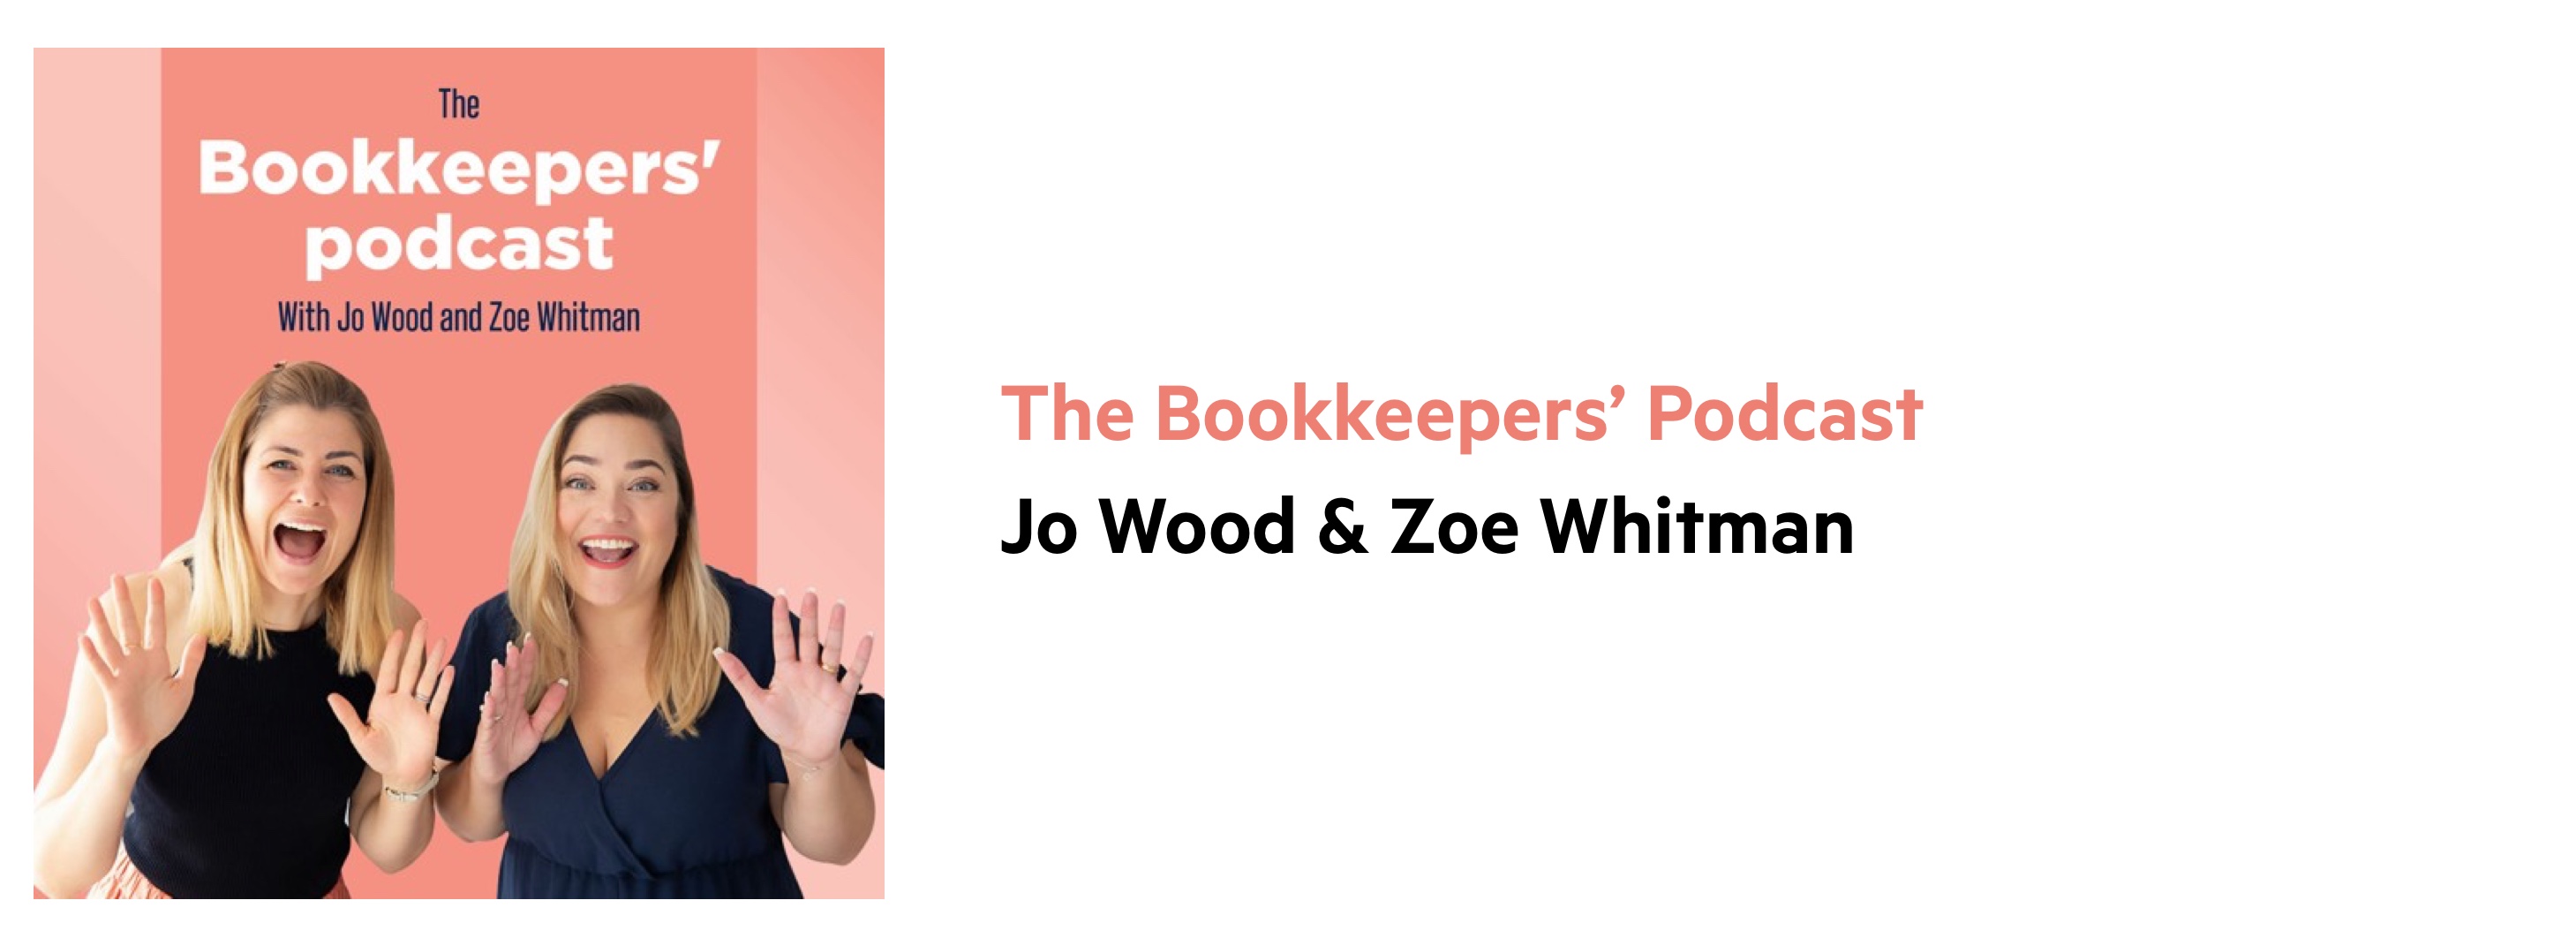 Cover image of The Bookkeepers' Podcast, which includes hosts Jo Wood & Zoe Whitman raising their hands and smiling.